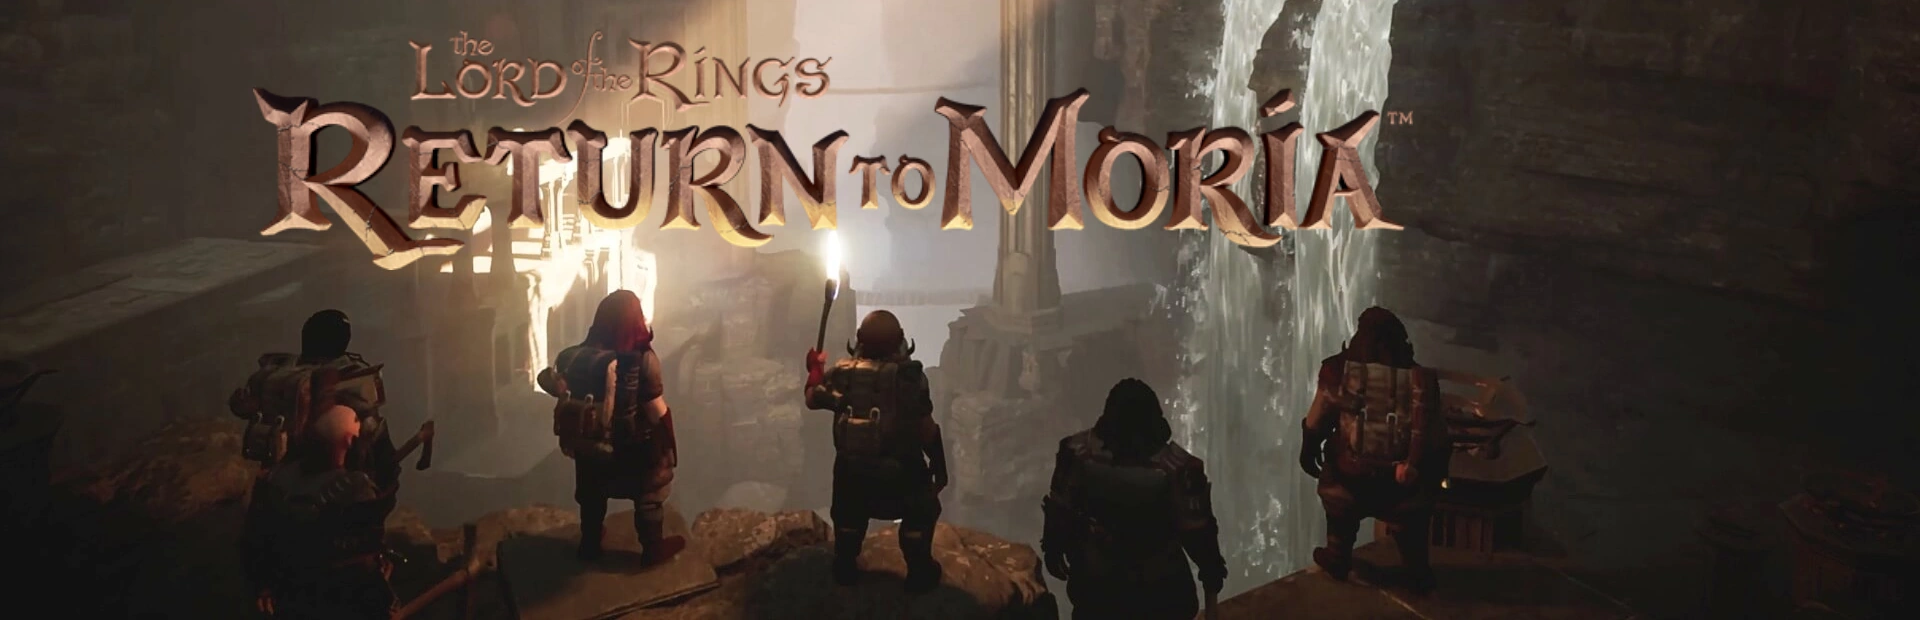 The.Lord .of .the .Rings .Return.to .Moria .banner1